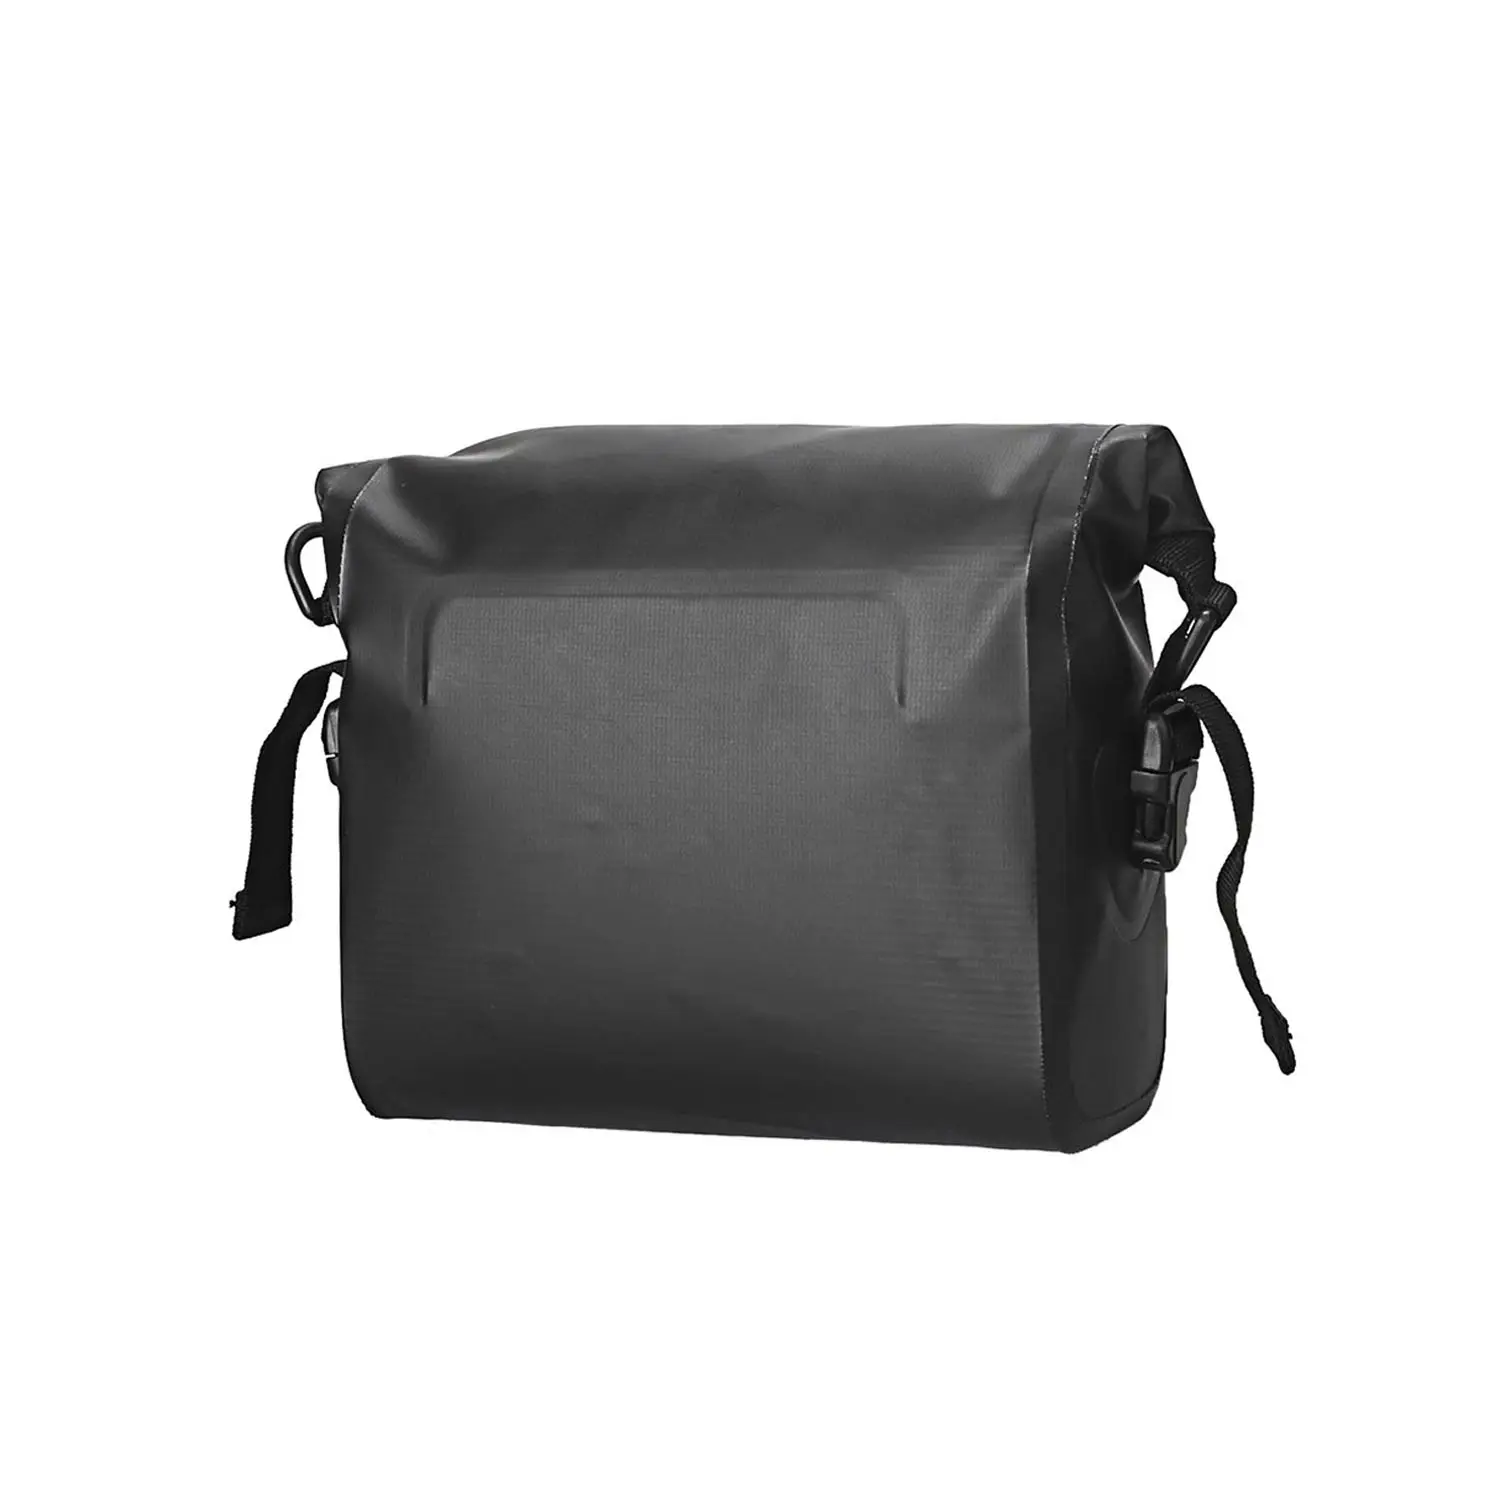 Best Selling Waterproof Bicycle Handlebar Bag Roll Top Cycling Bag For Outdoor Activities